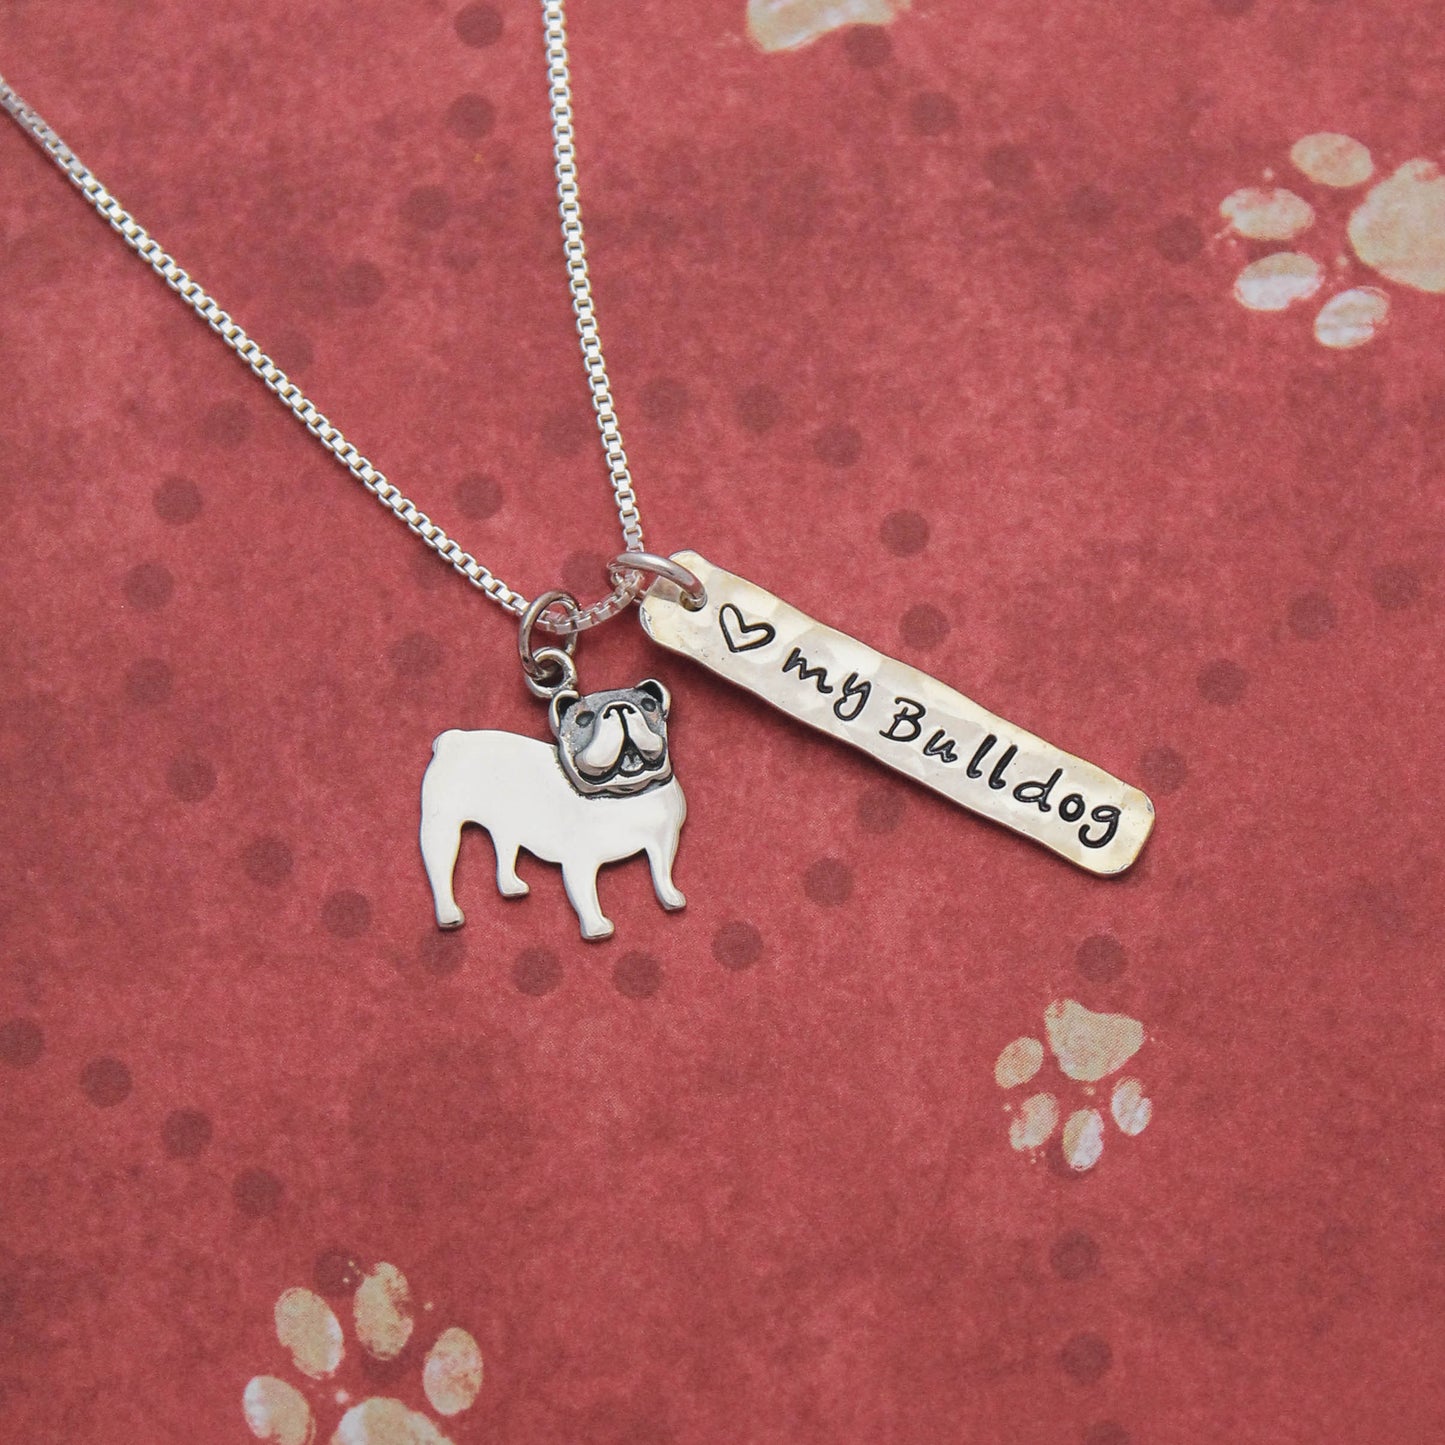 LOVE my Bulldog Necklace, Sterling Silver English Bulldog Necklace, Bulldog Lover Gift, Bulldog Dog Jewelry, English Bulldog Gift for Her